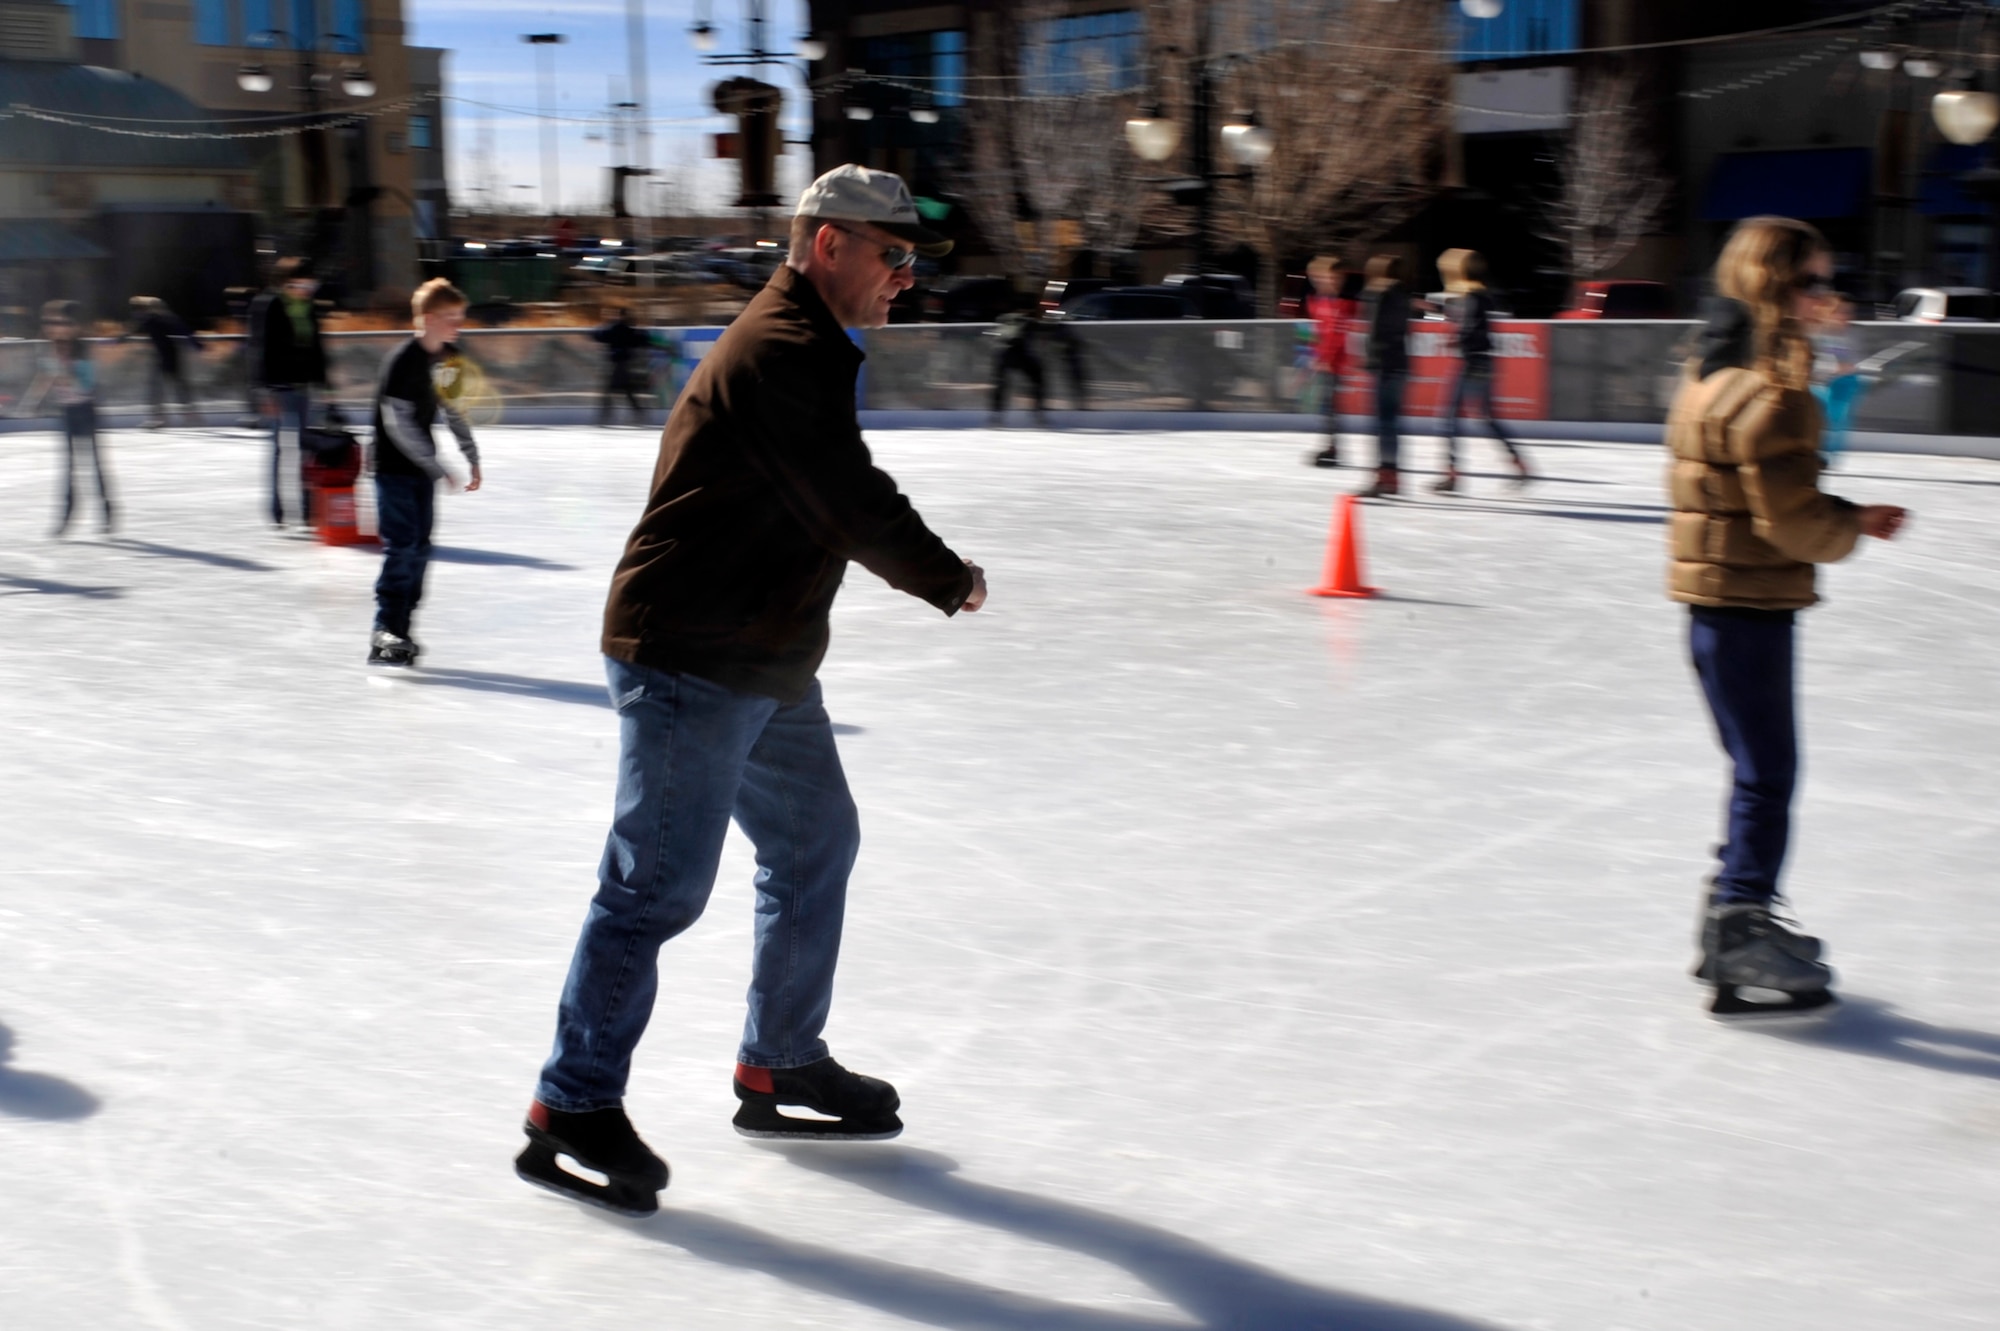 Lt. Col. Hew Wells, 460th Space Communications Squadron commander, skates during an event for families of deployed service members Feb. 2, 2013, at the Southlands Pond. Nearly 50 family members turned out for the free skating event hosted by the Airman and Family Readiness Center. (U.S. Air Force photo by Airman 1st Class Riley Johnson/Released)